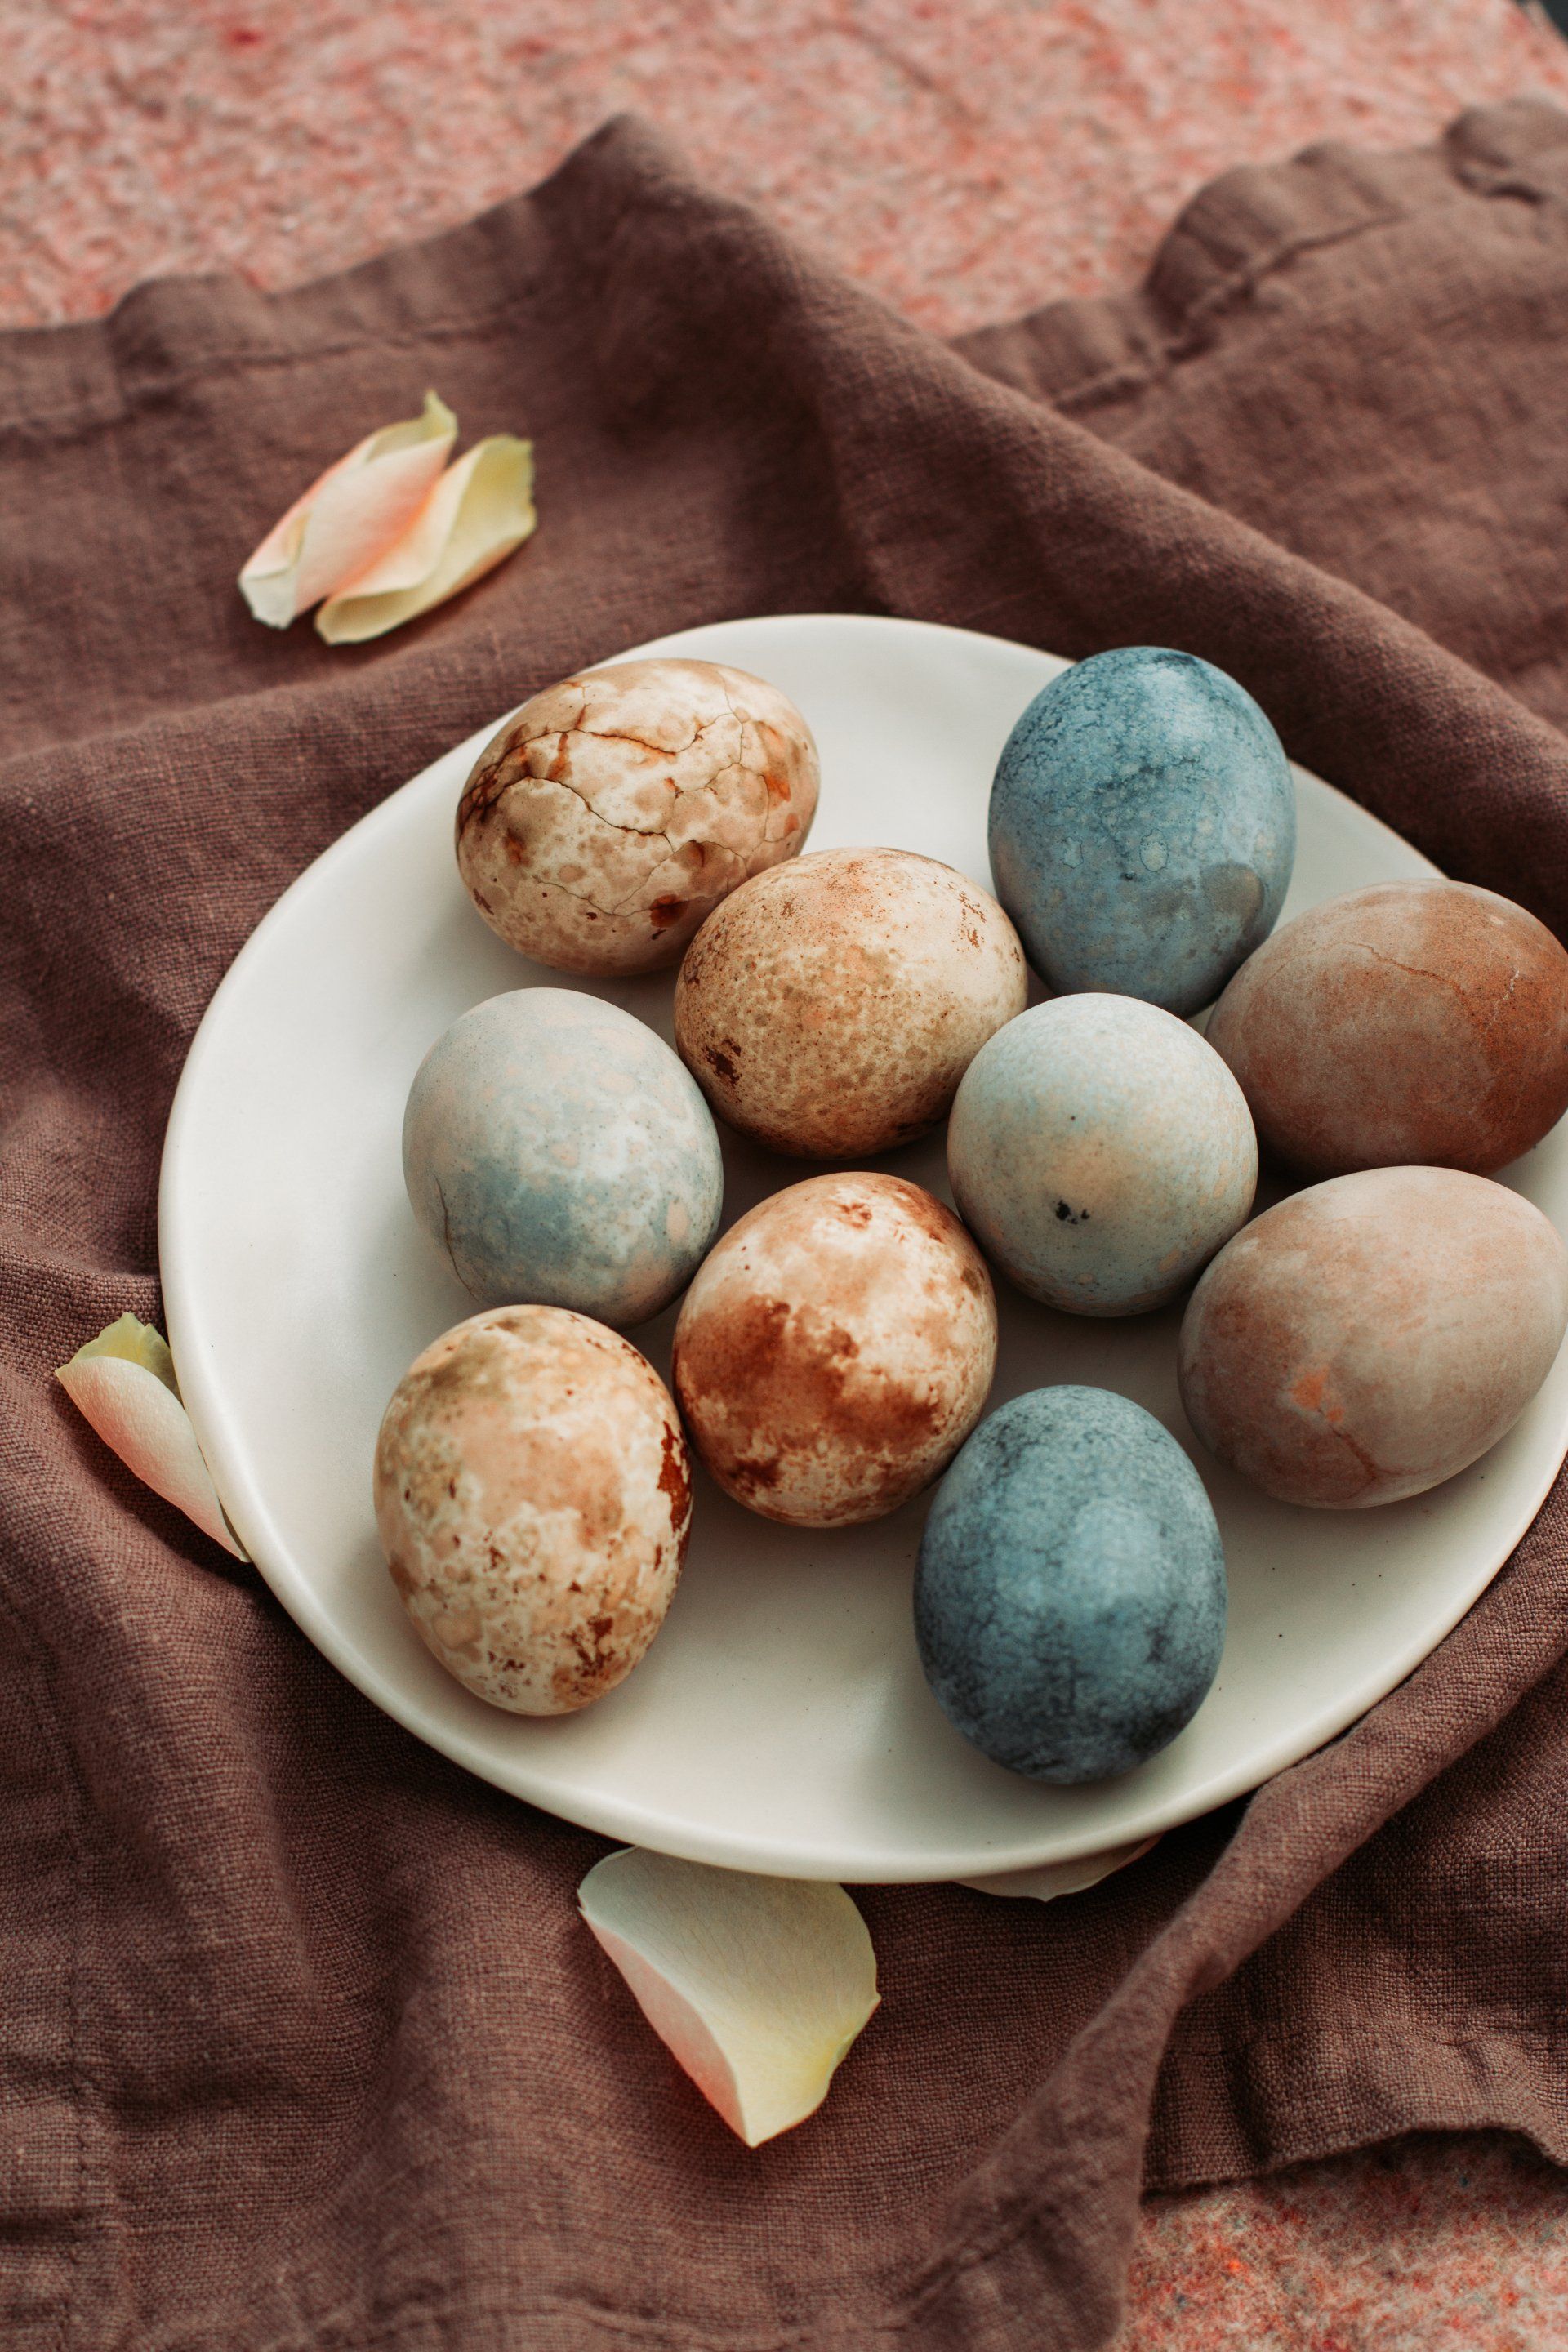 There are many different colored eggs on the plate.